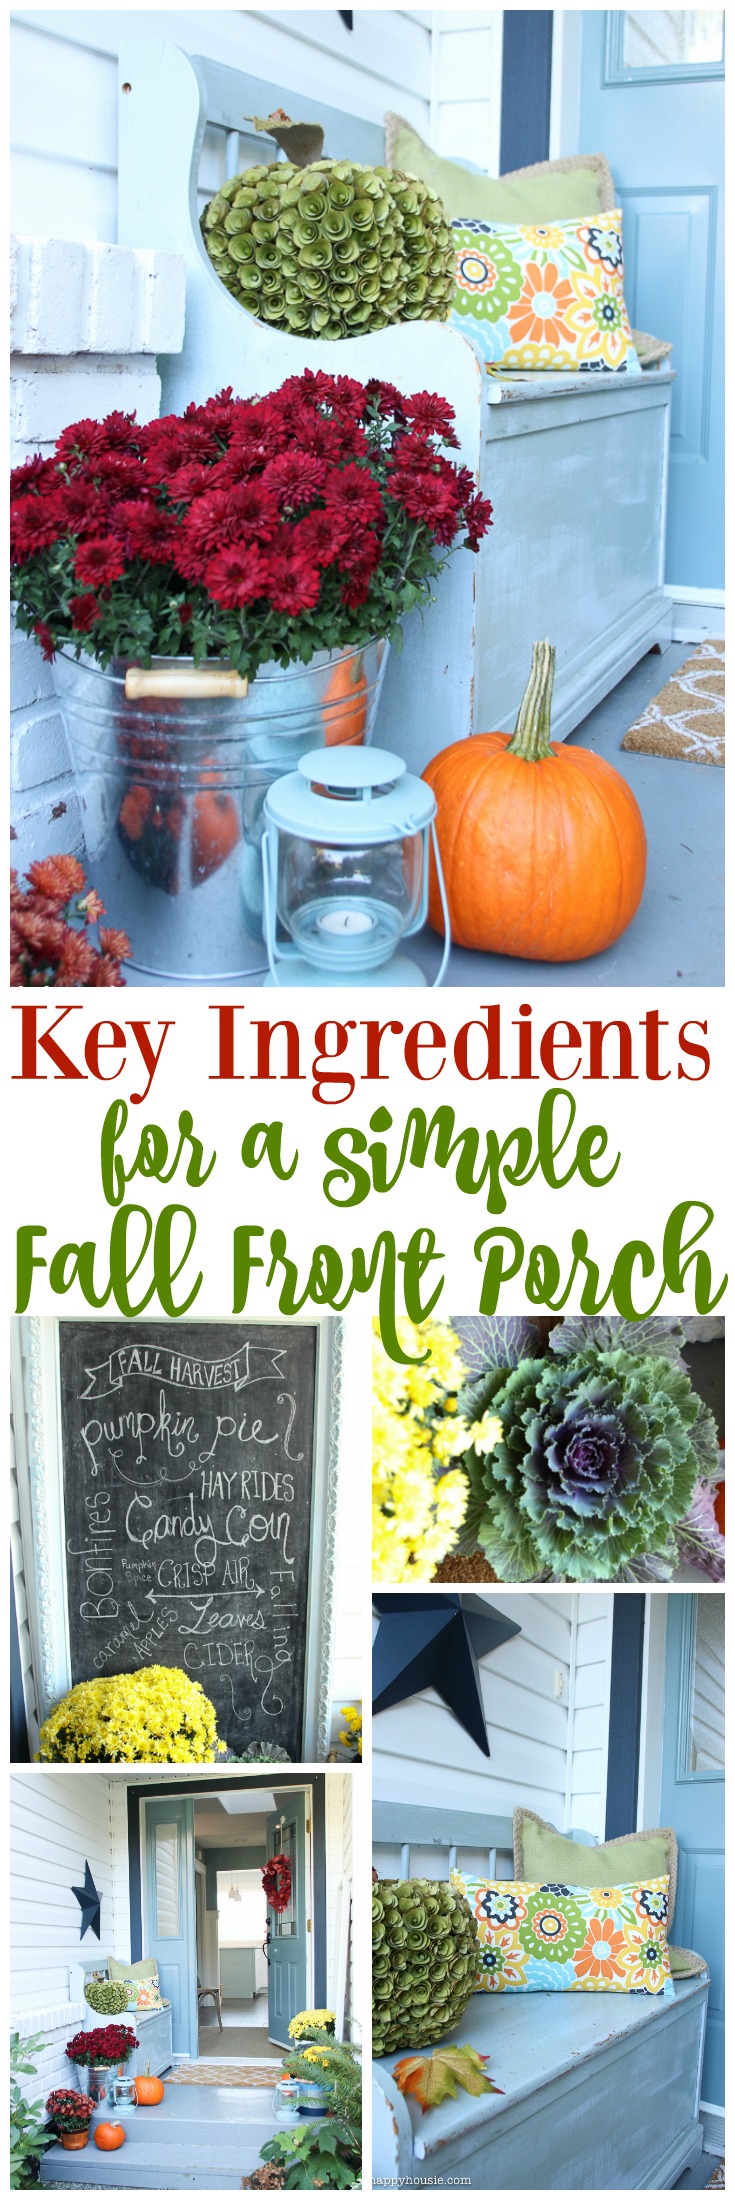 key-ingredients-for-a-simple-fall-front-porch